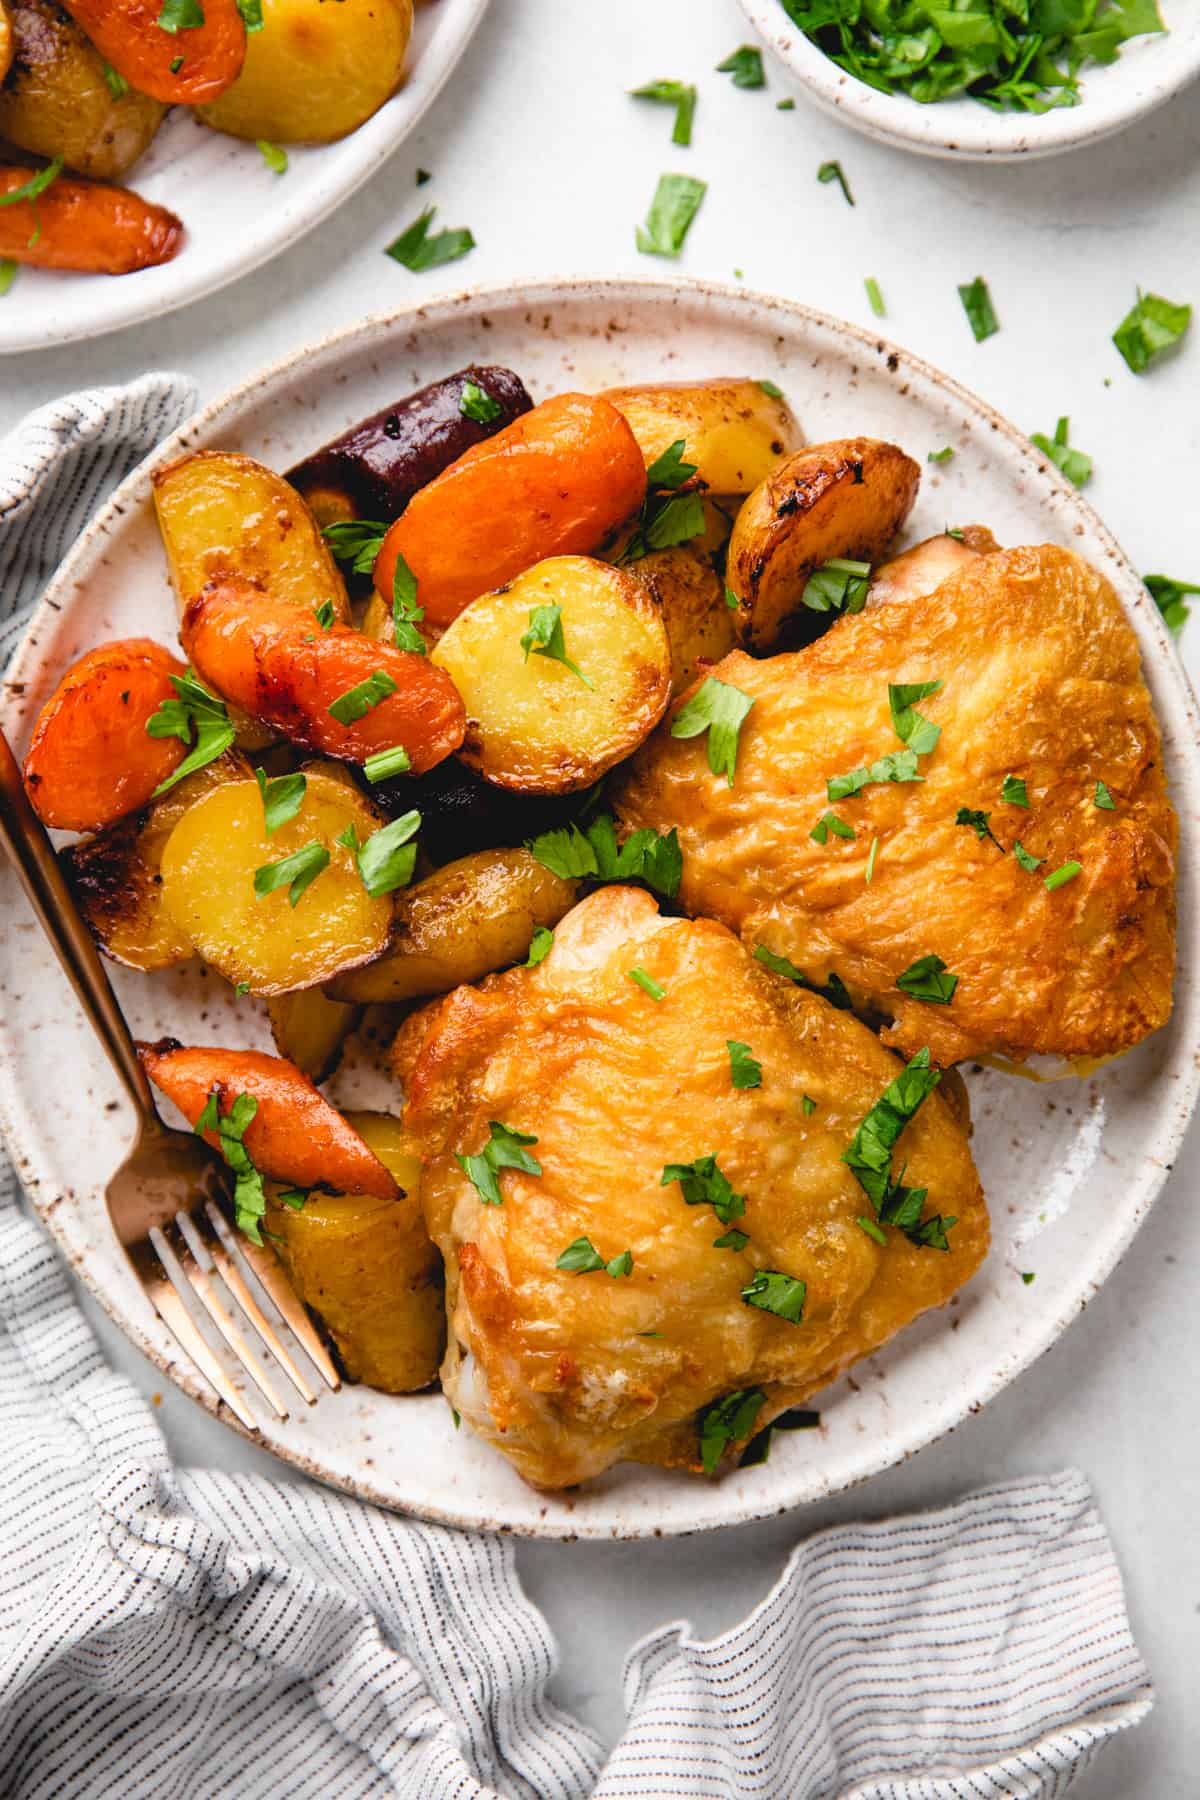 Roasted chicken thighs with carrots and potatoes on a plate.